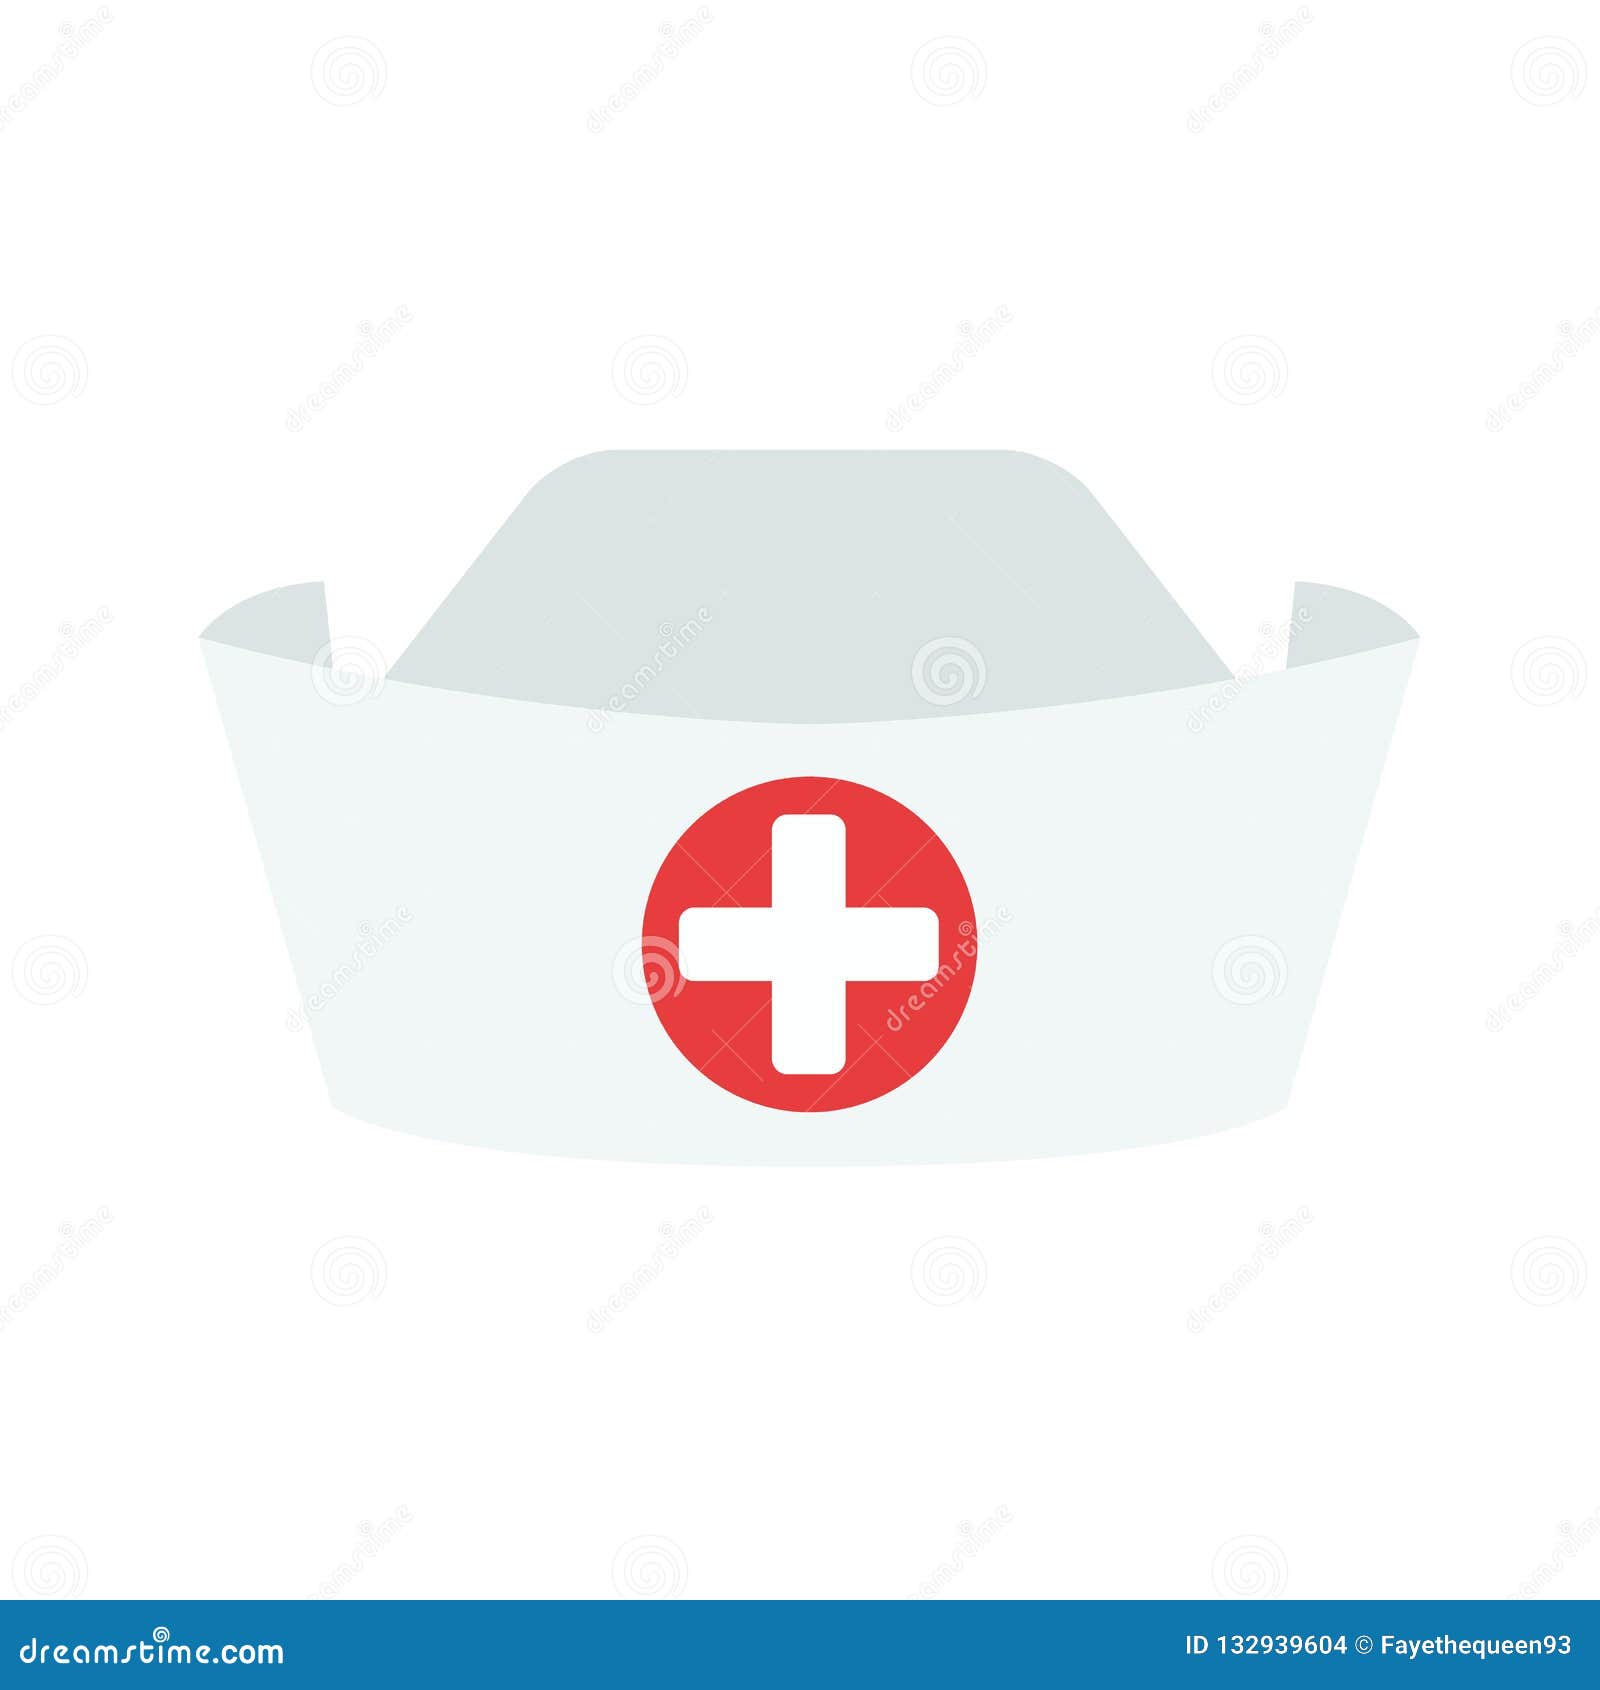 https://thumbs.dreamstime.com/z/nurse-hat-isolated-white-background-nurse-icon-vector-stock-nurse-hat-isolated-white-background-nurse-icon-132939604.jpg